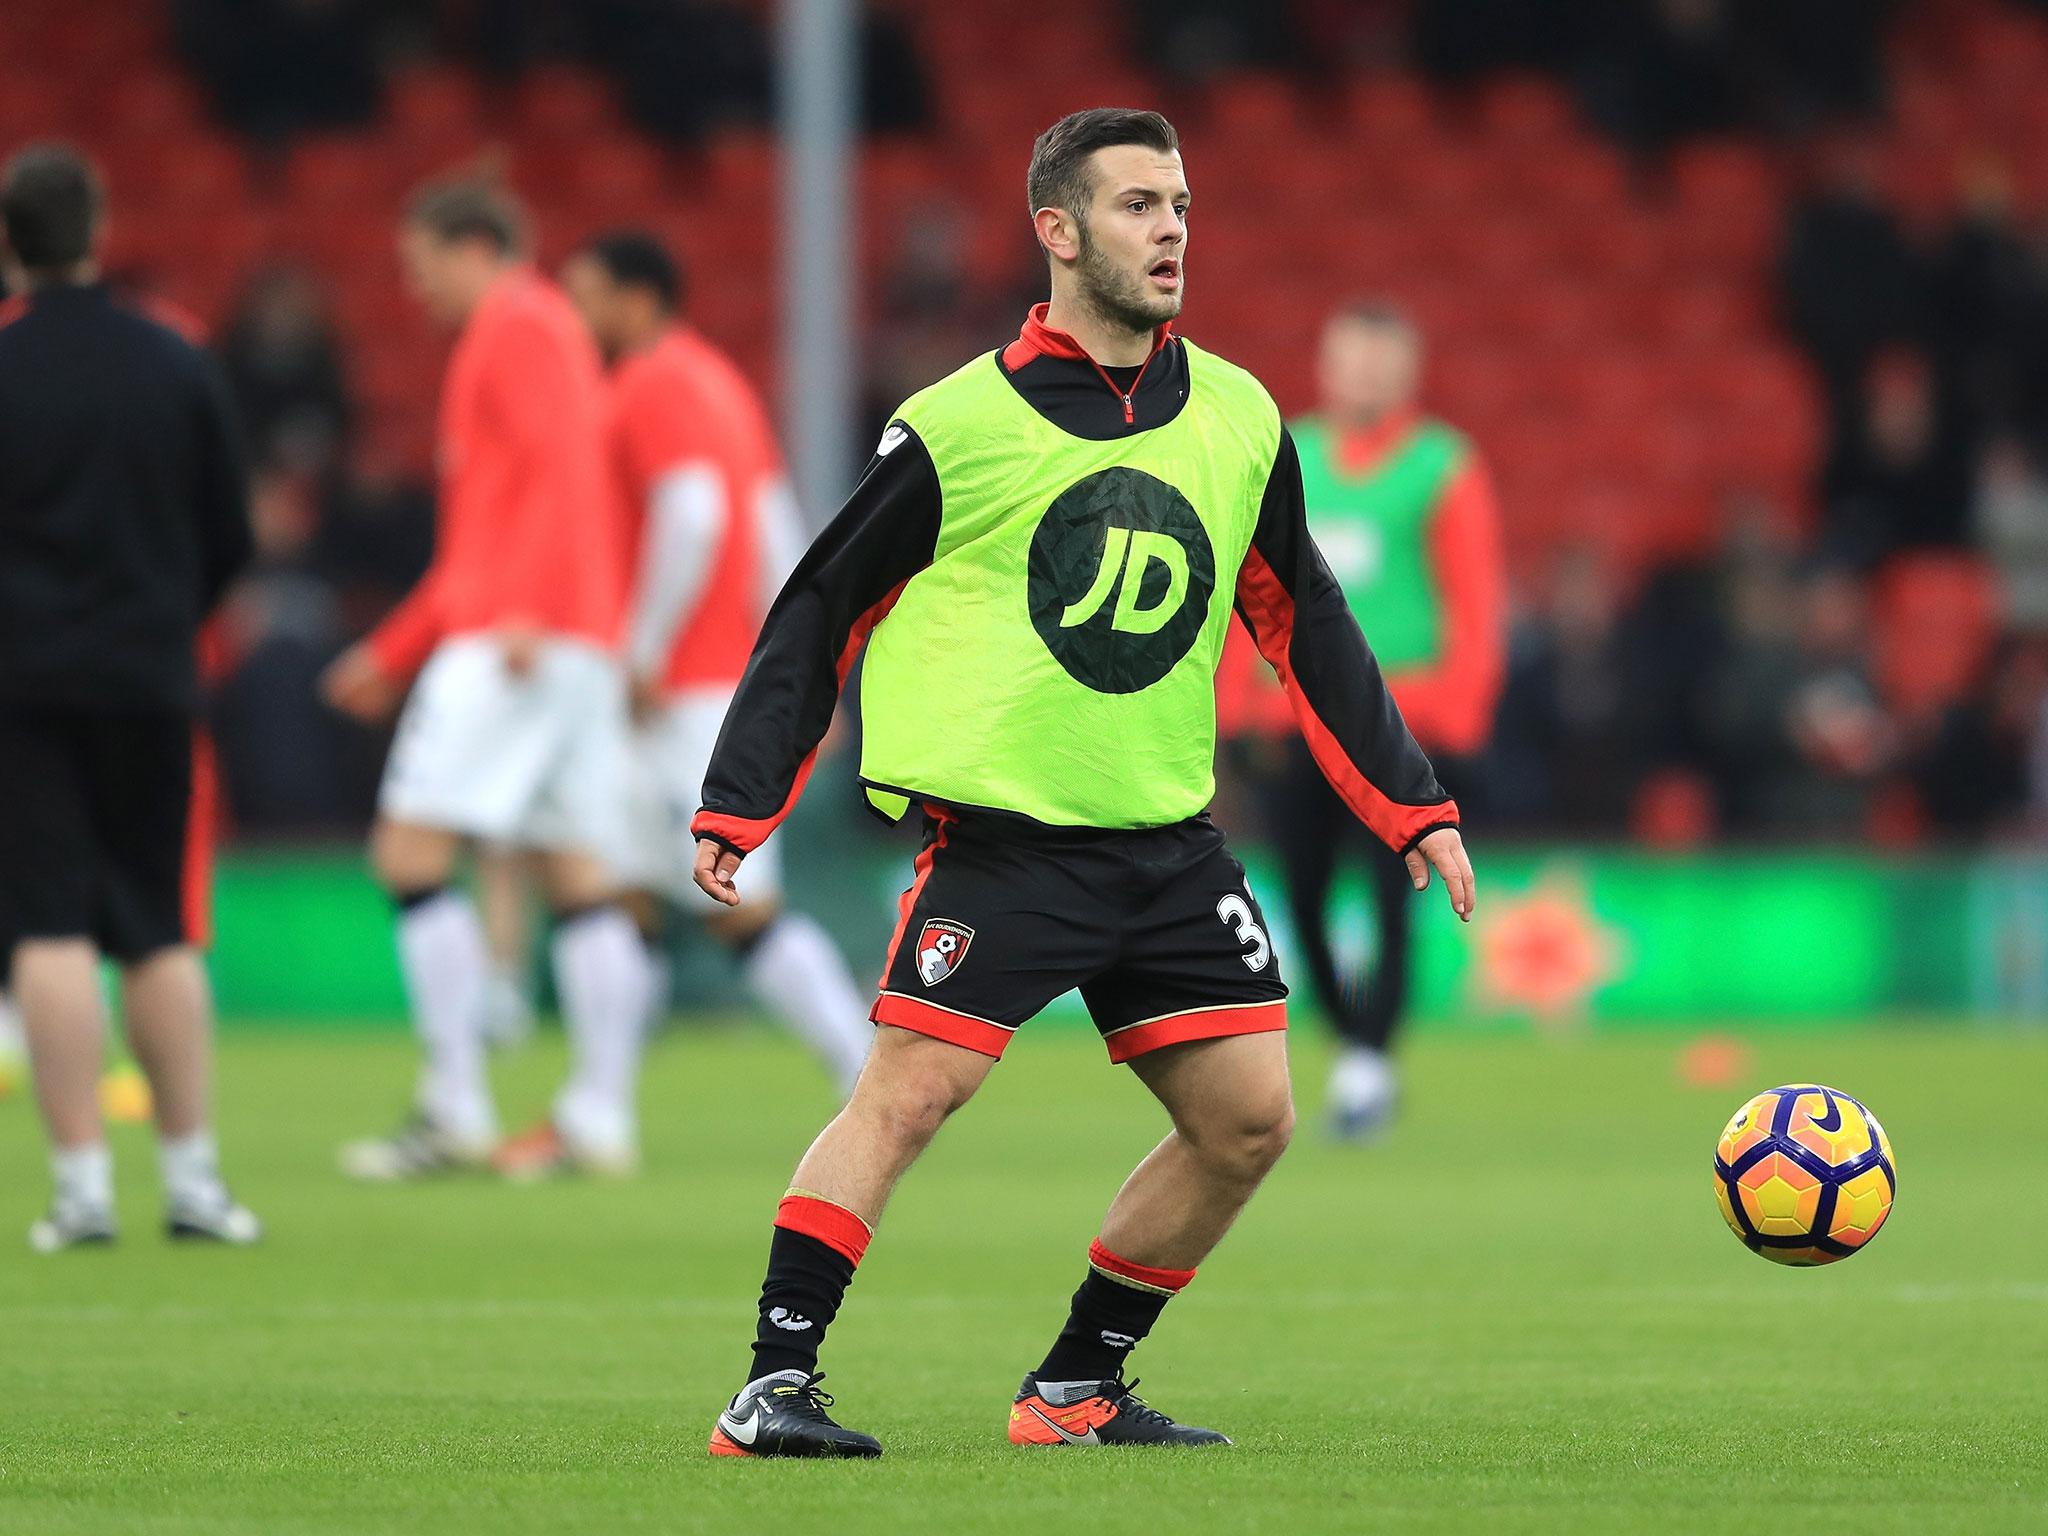 Wilshere in training prior to Bournemouth's 2-0 defeat by Manchester City on Monday night